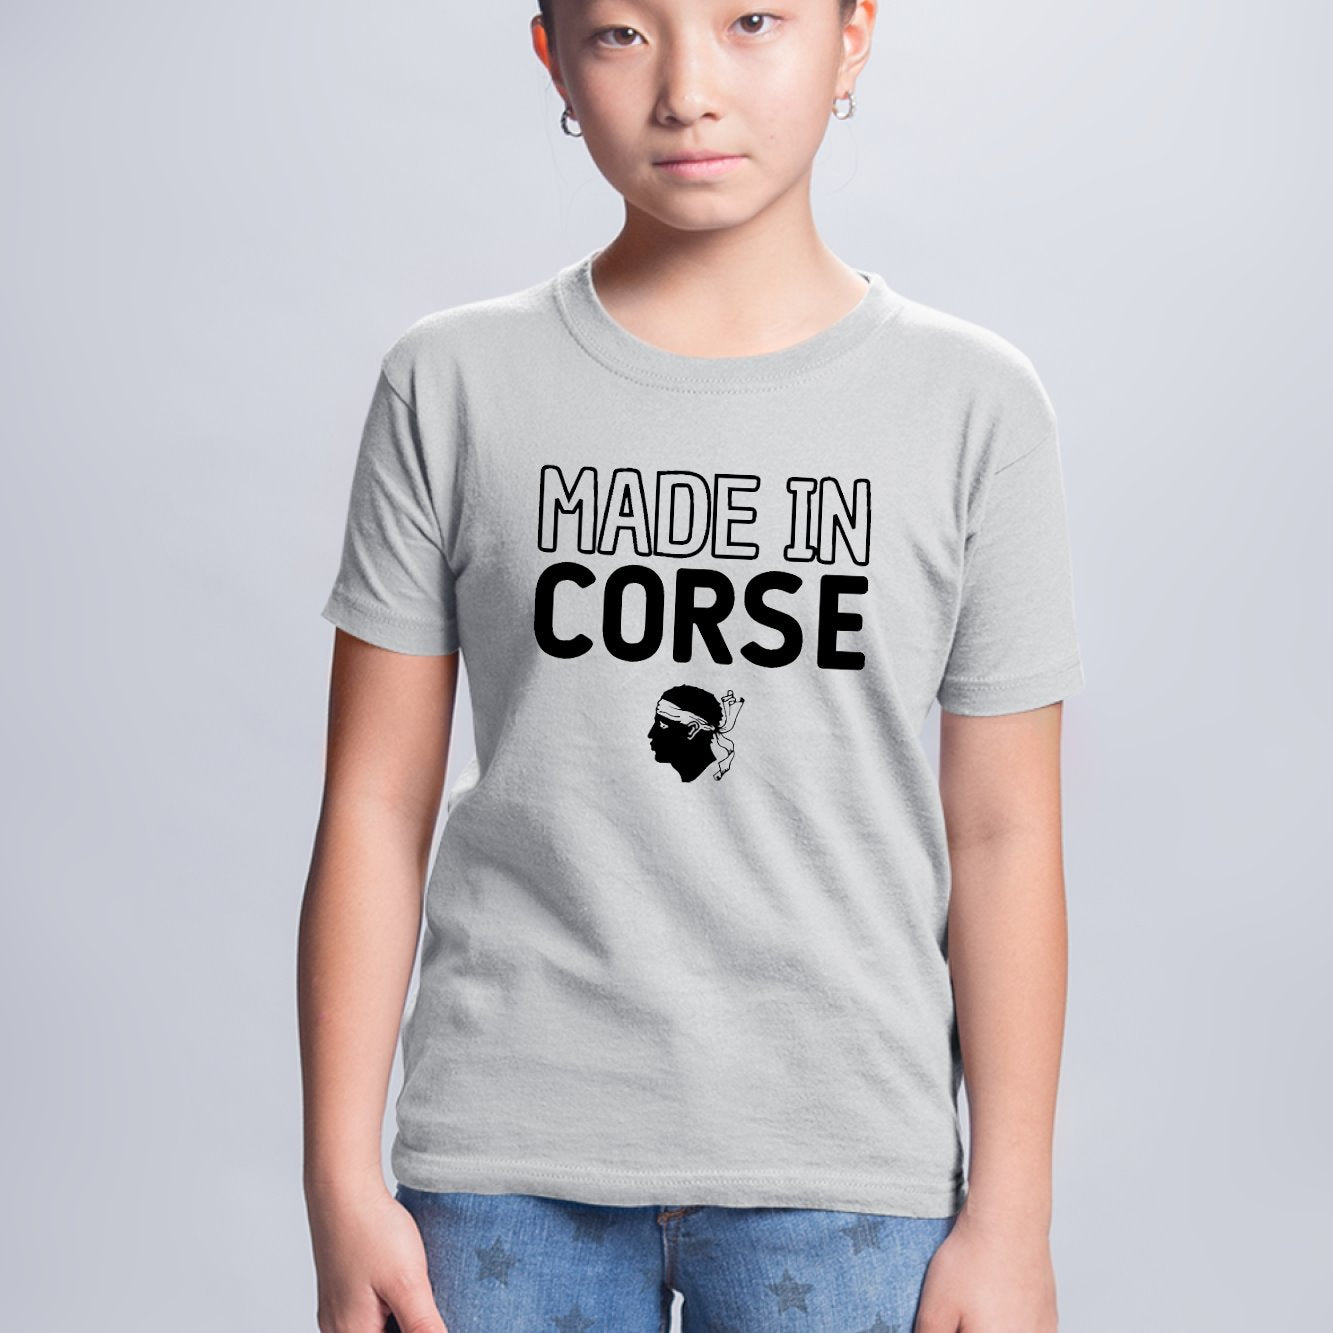 T-Shirt Enfant Made in Corse Gris